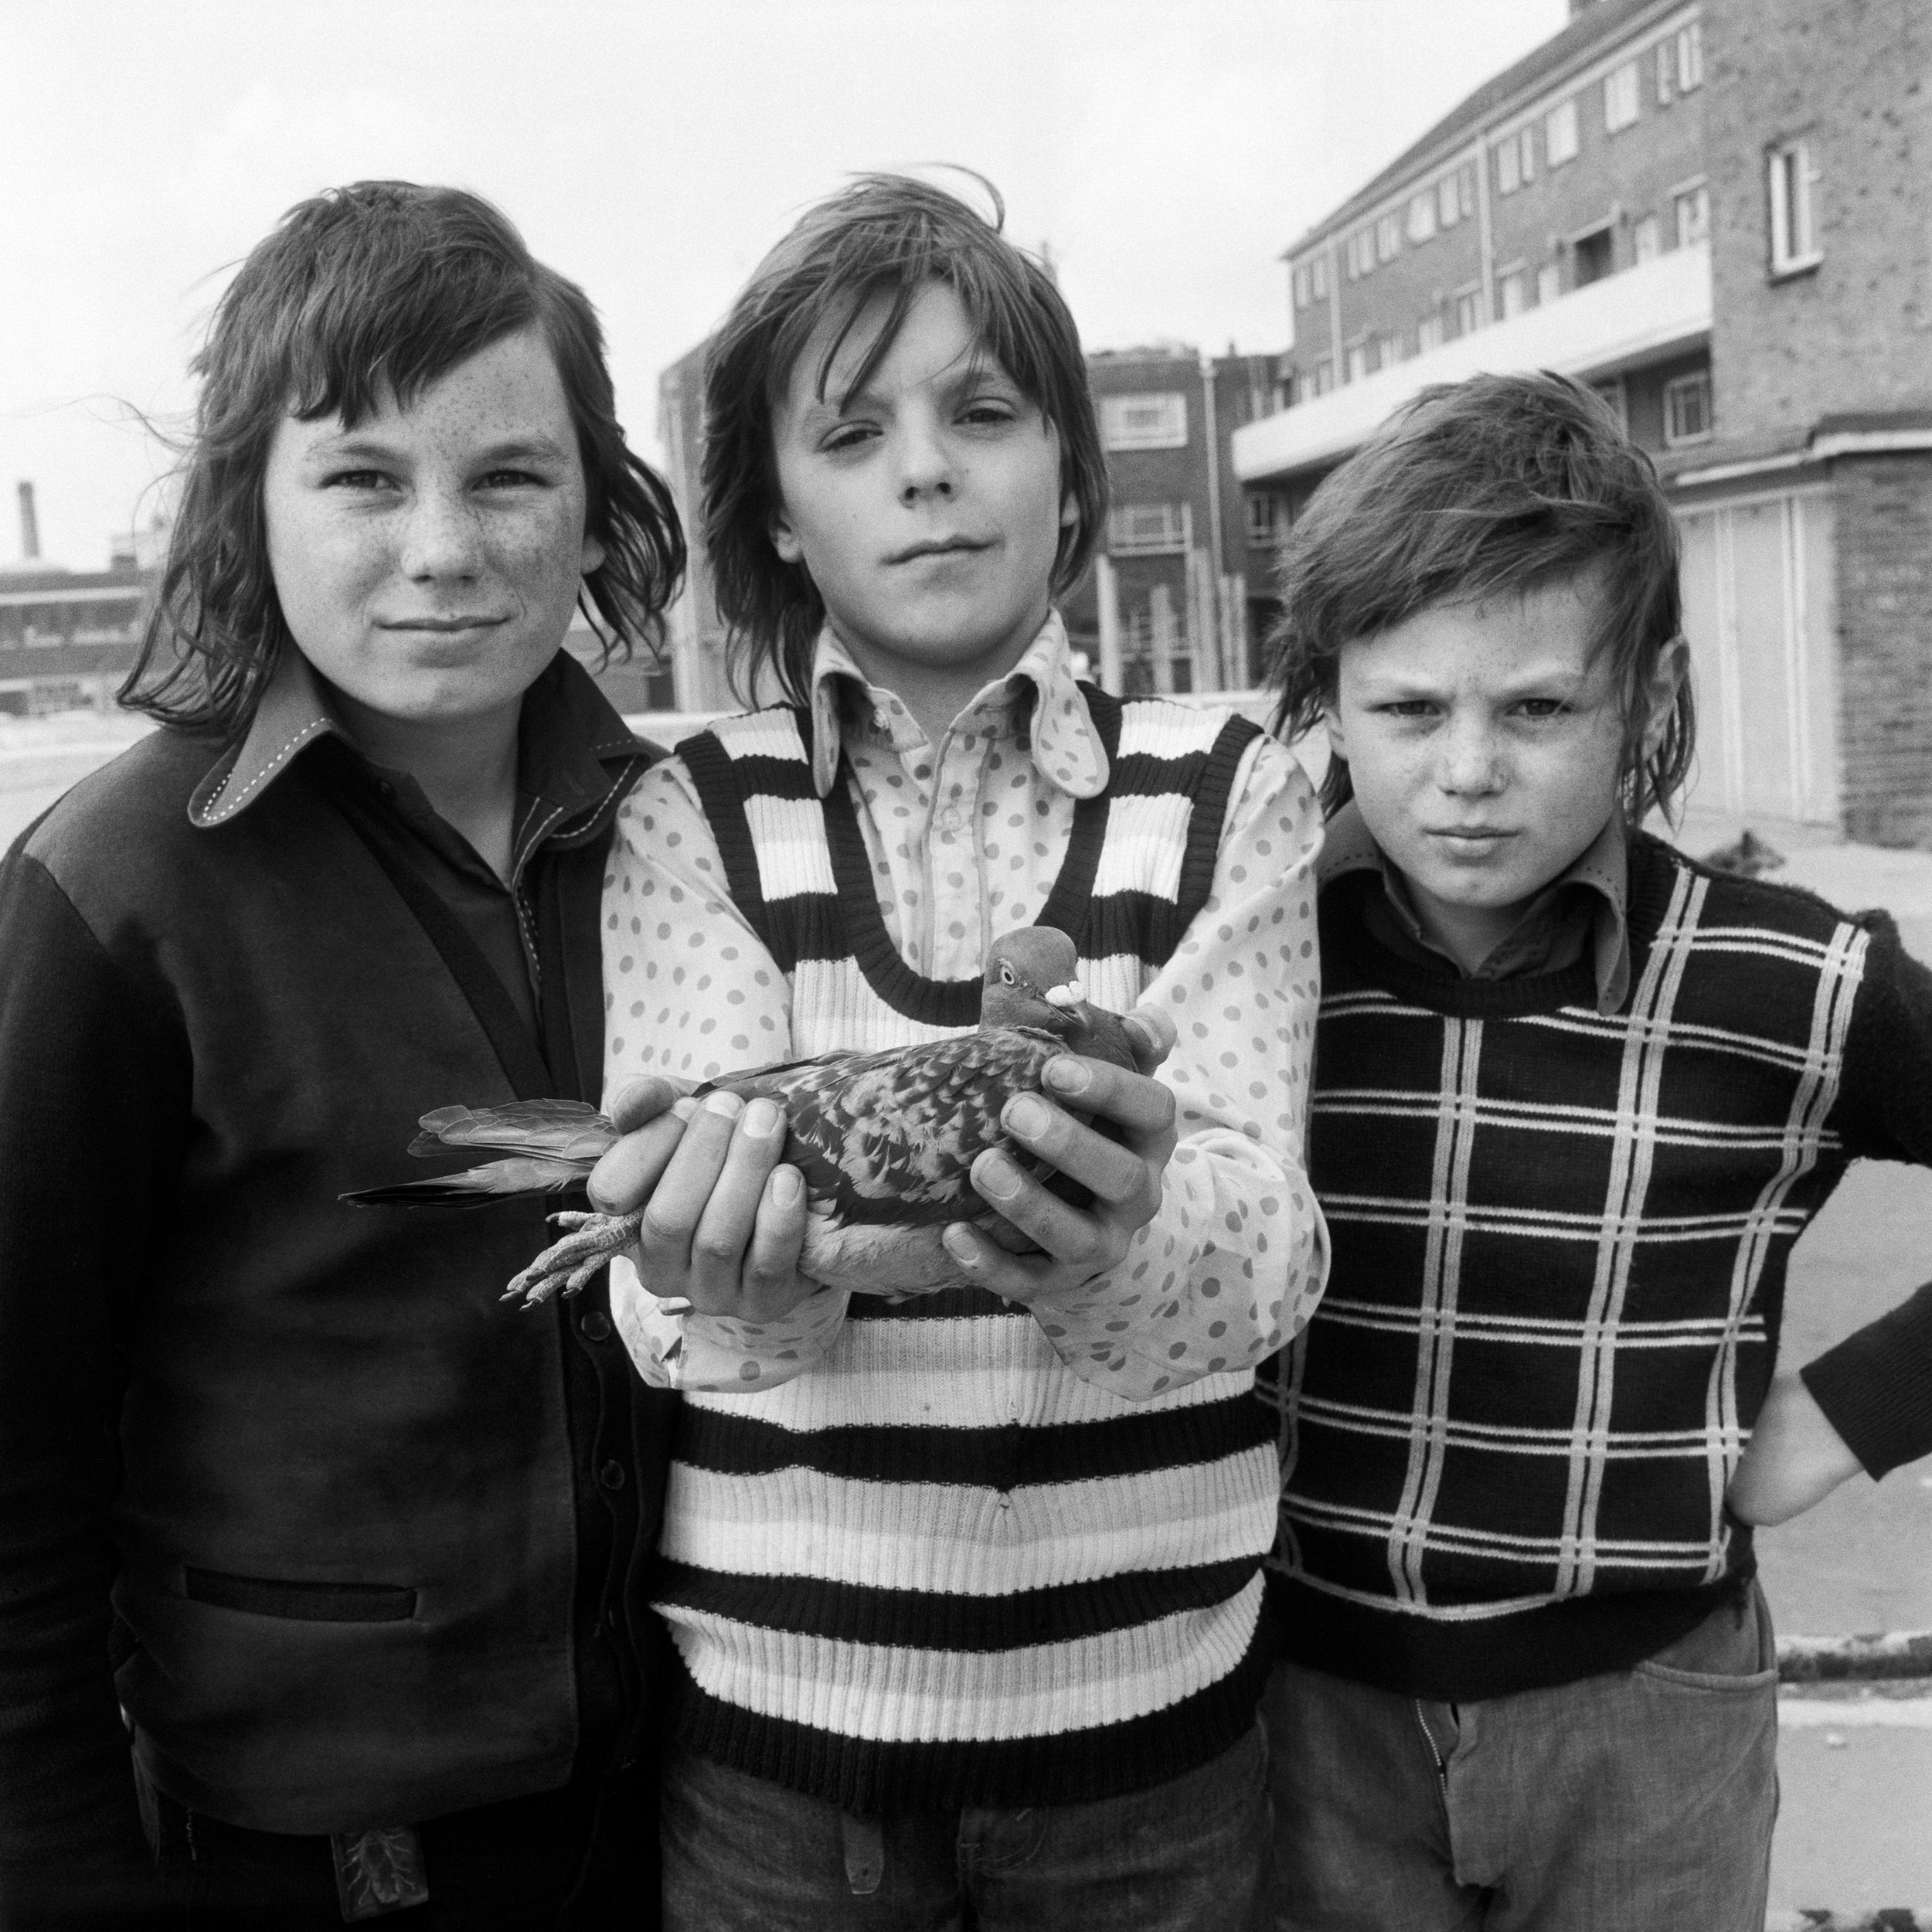  Group portrait from the Free Photographic Omnibus, John Payne, aged 11, with pigeon Chequer and friends the White brothers, Michael and Kalvin, Portsmouth. April 1974 ©Daniel Meadows 